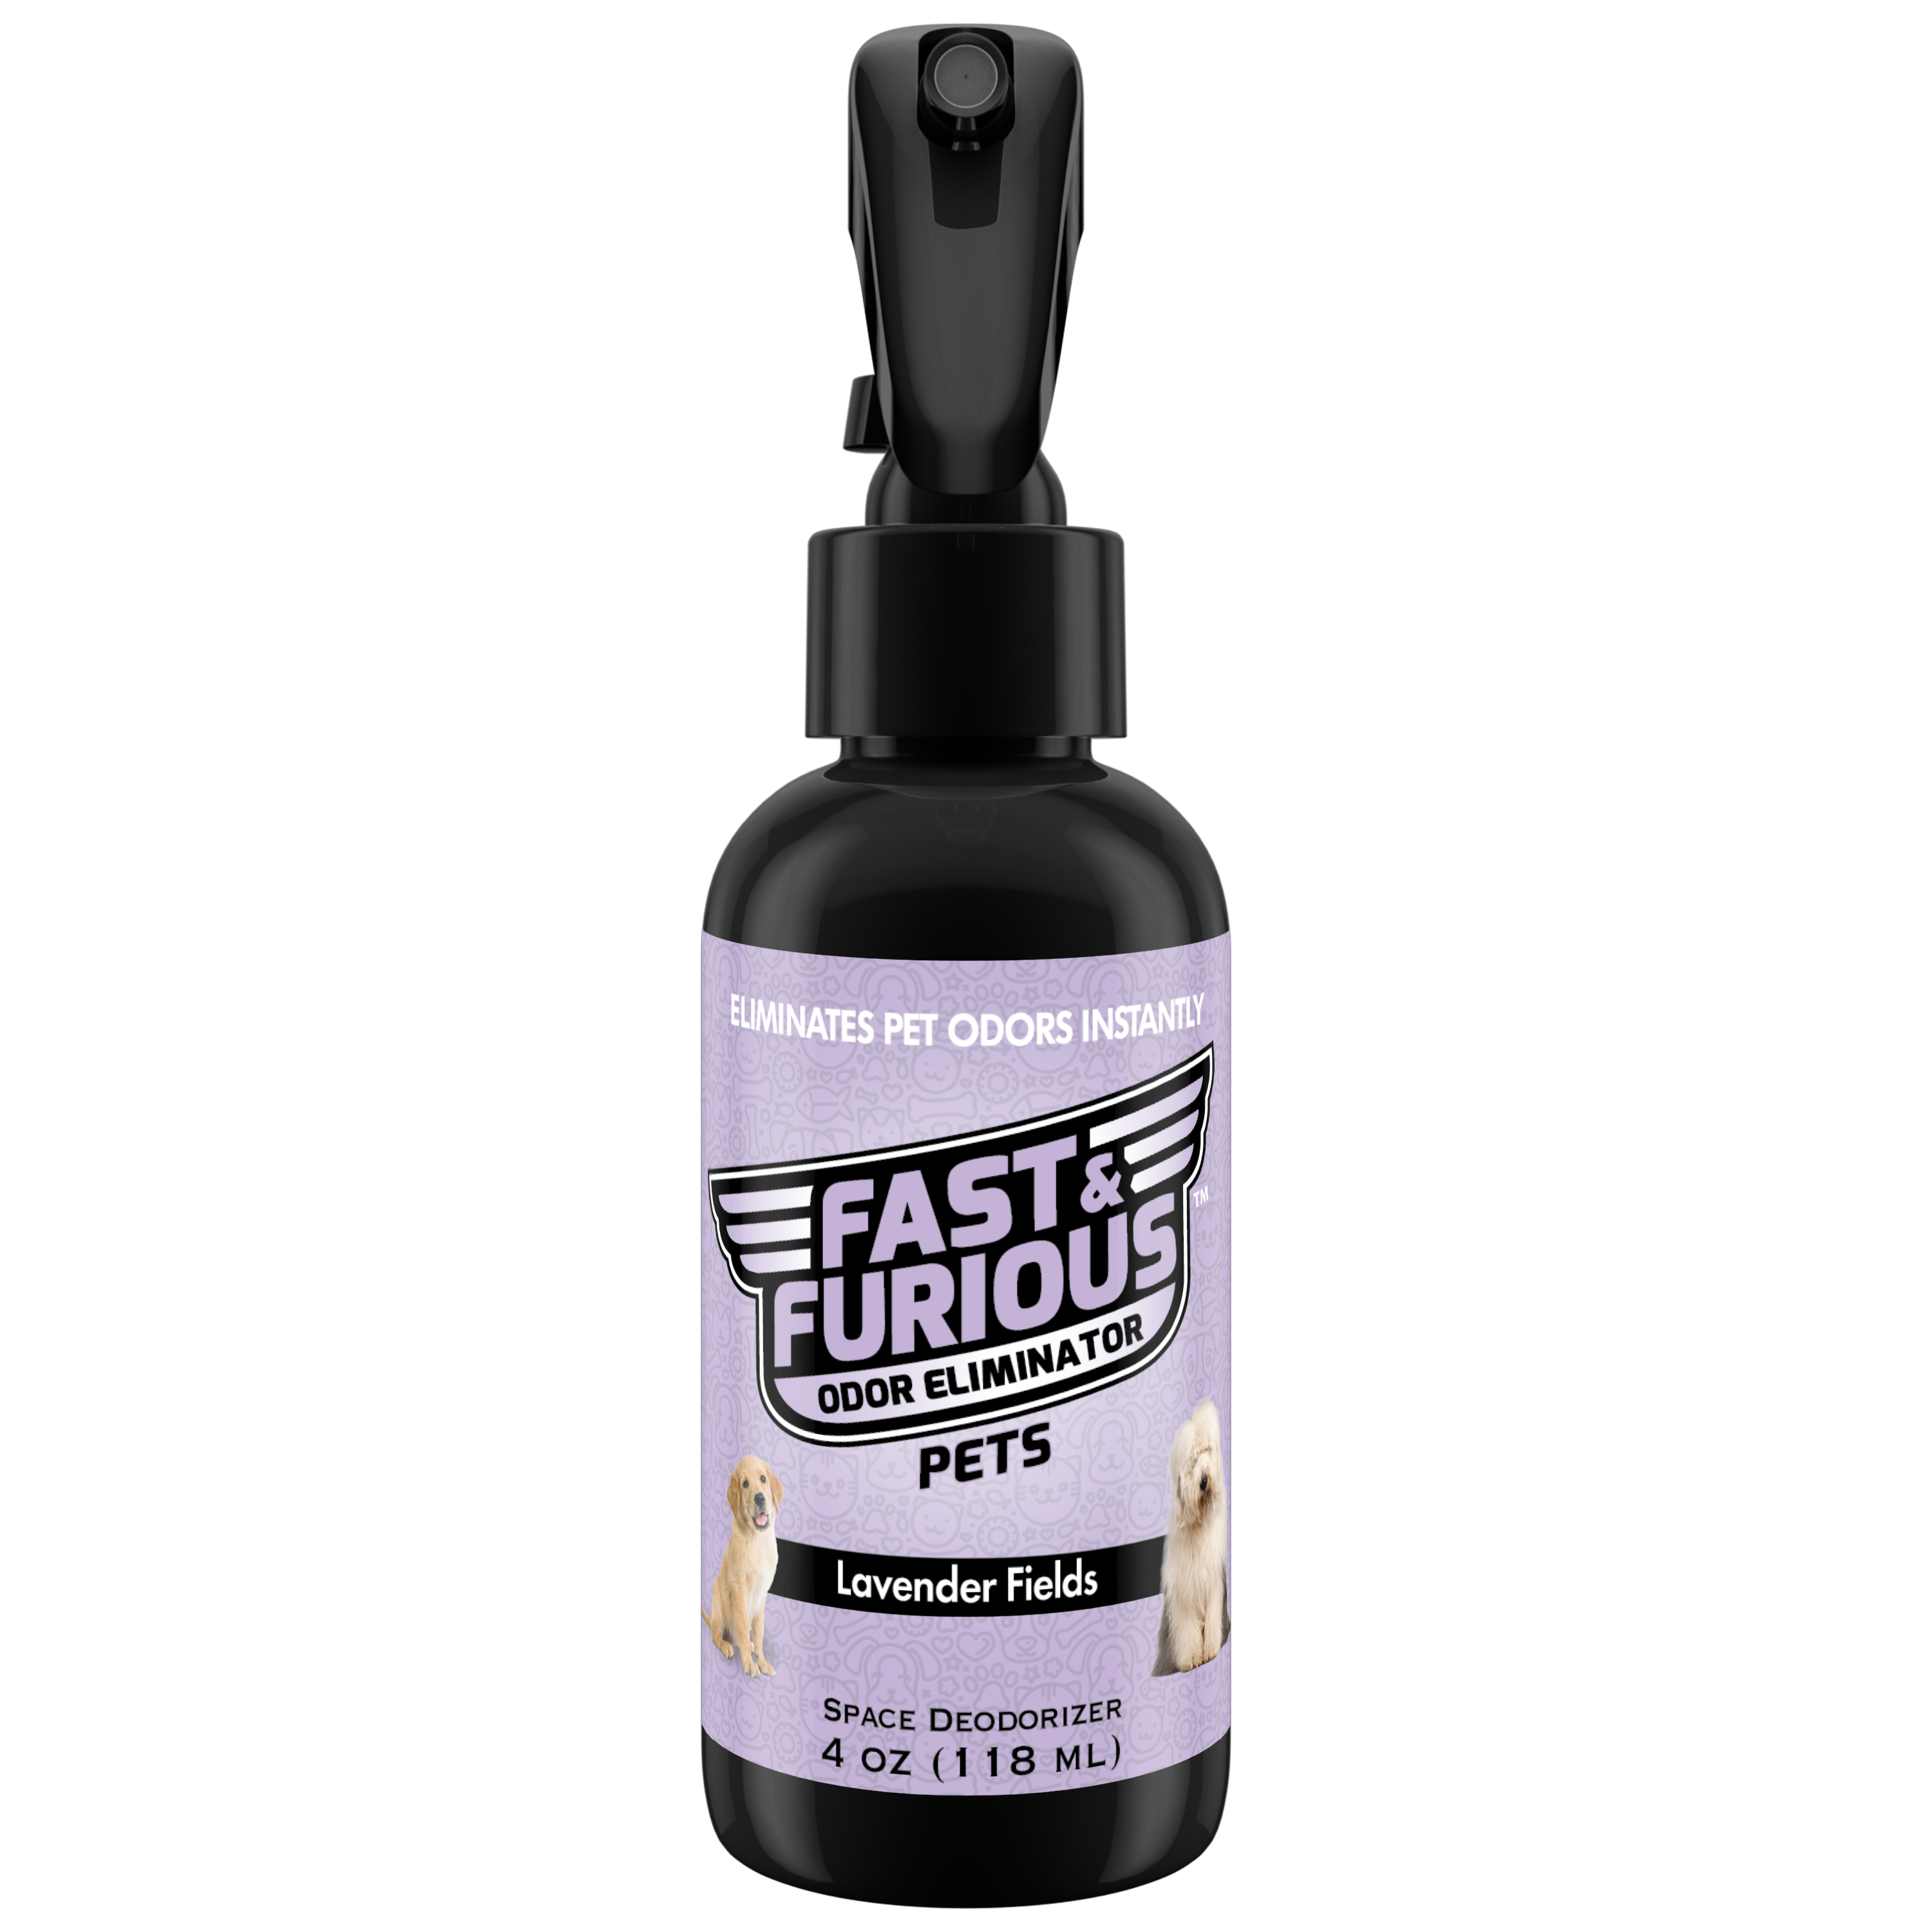 Fast and Furious Pets Odor Eliminator - Lavender Fields Scent